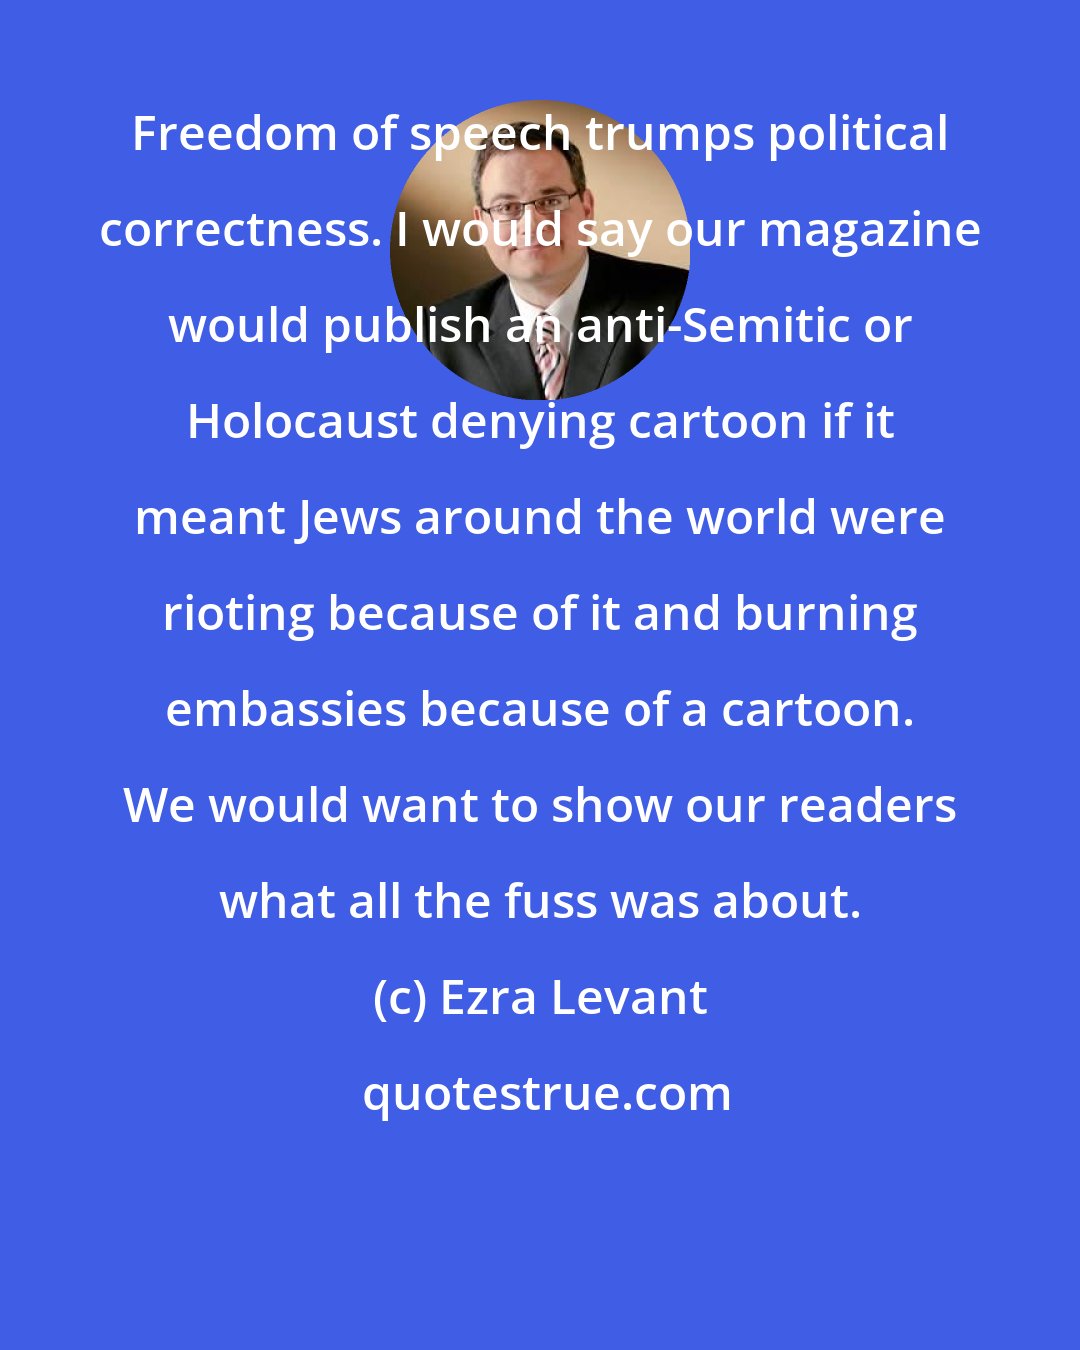 Ezra Levant: Freedom of speech trumps political correctness. I would say our magazine would publish an anti-Semitic or Holocaust denying cartoon if it meant Jews around the world were rioting because of it and burning embassies because of a cartoon. We would want to show our readers what all the fuss was about.